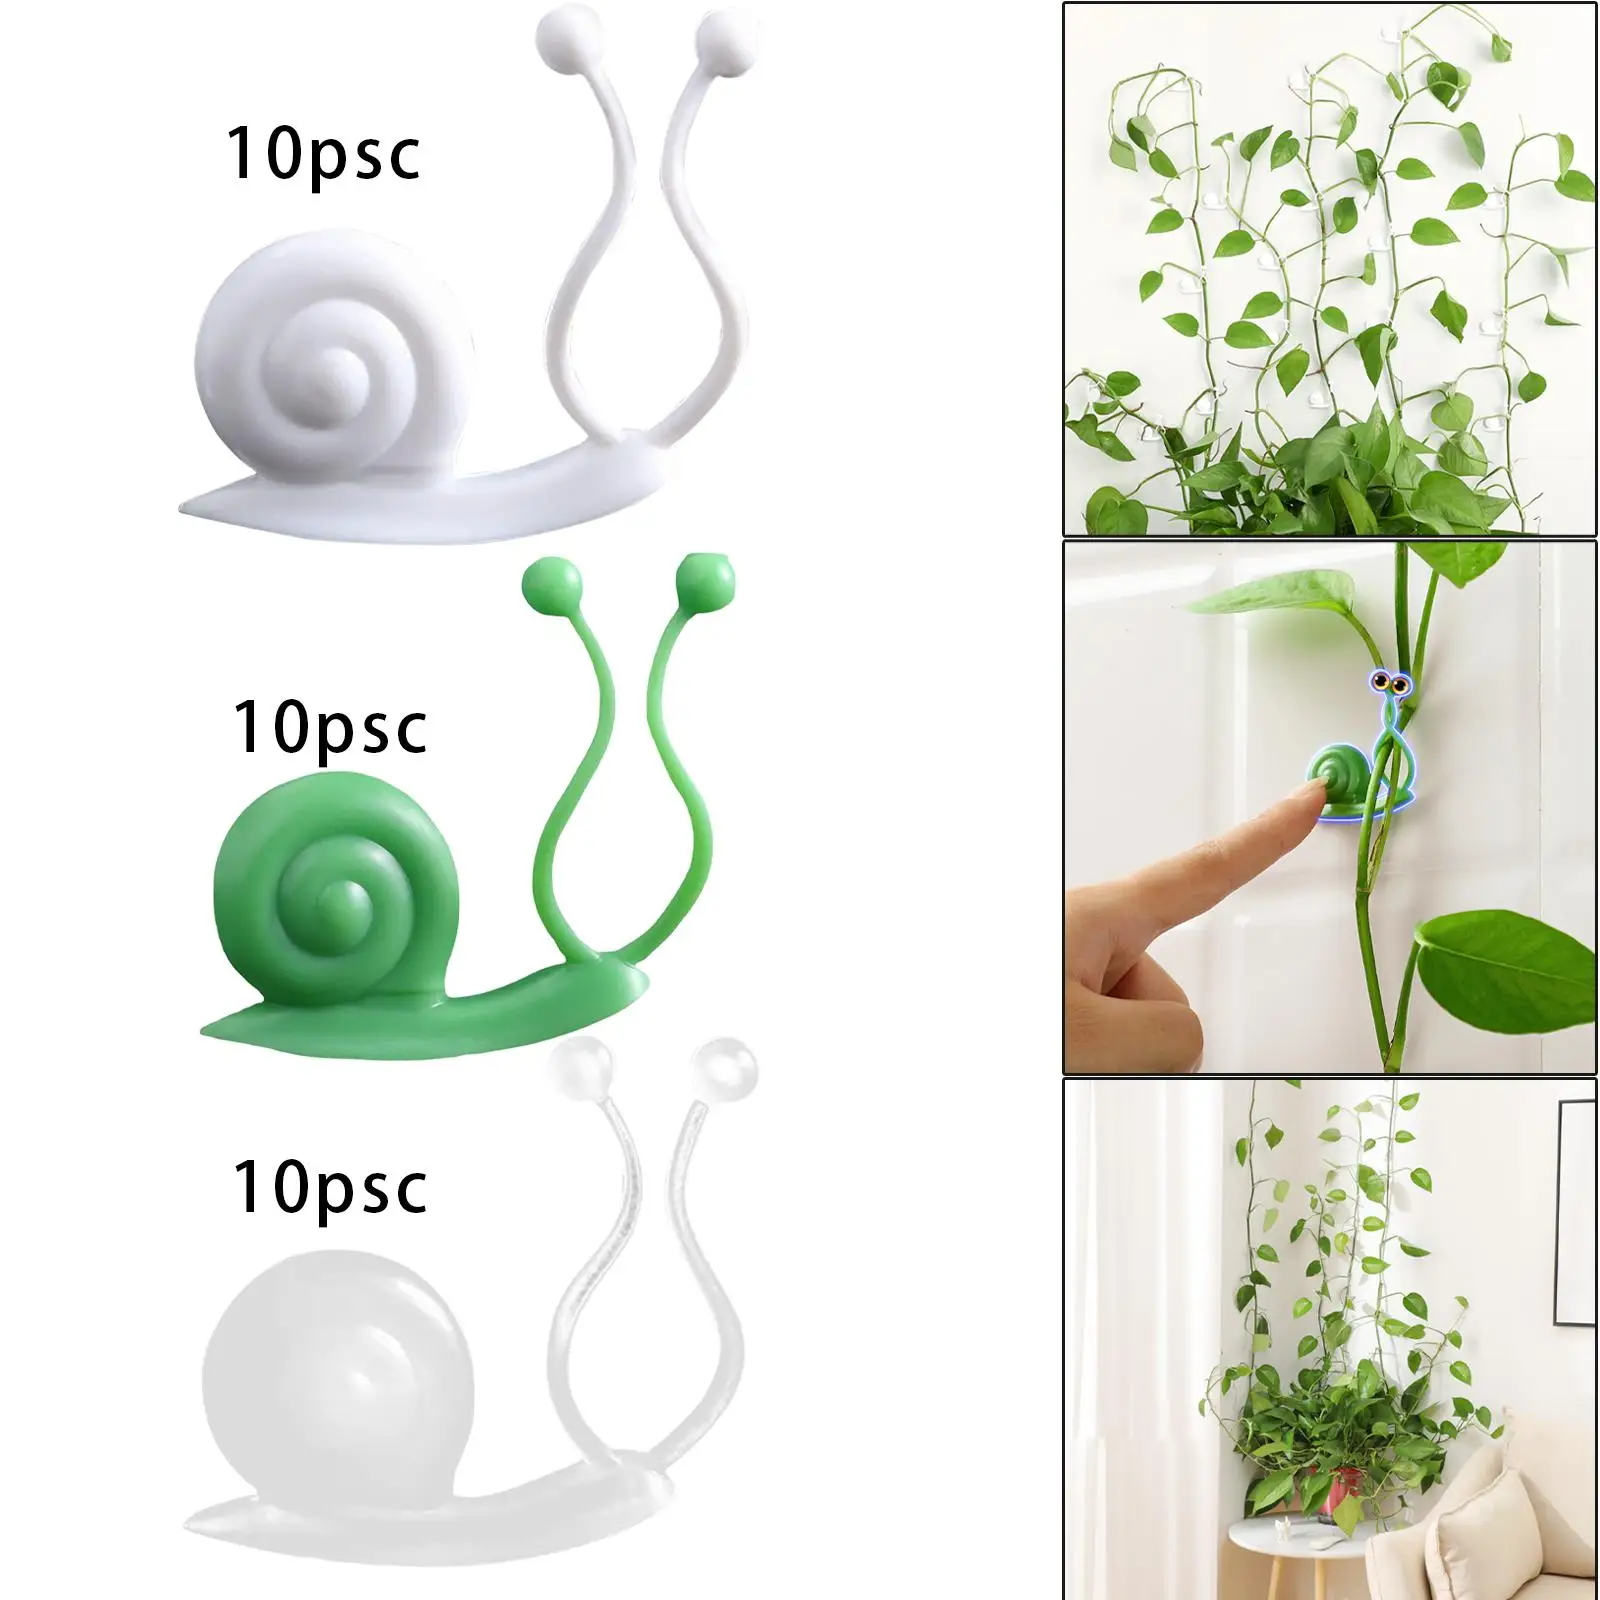 10Pcs Plant Climbing Wall Fixture Clips Decor for Gardening Plants Home